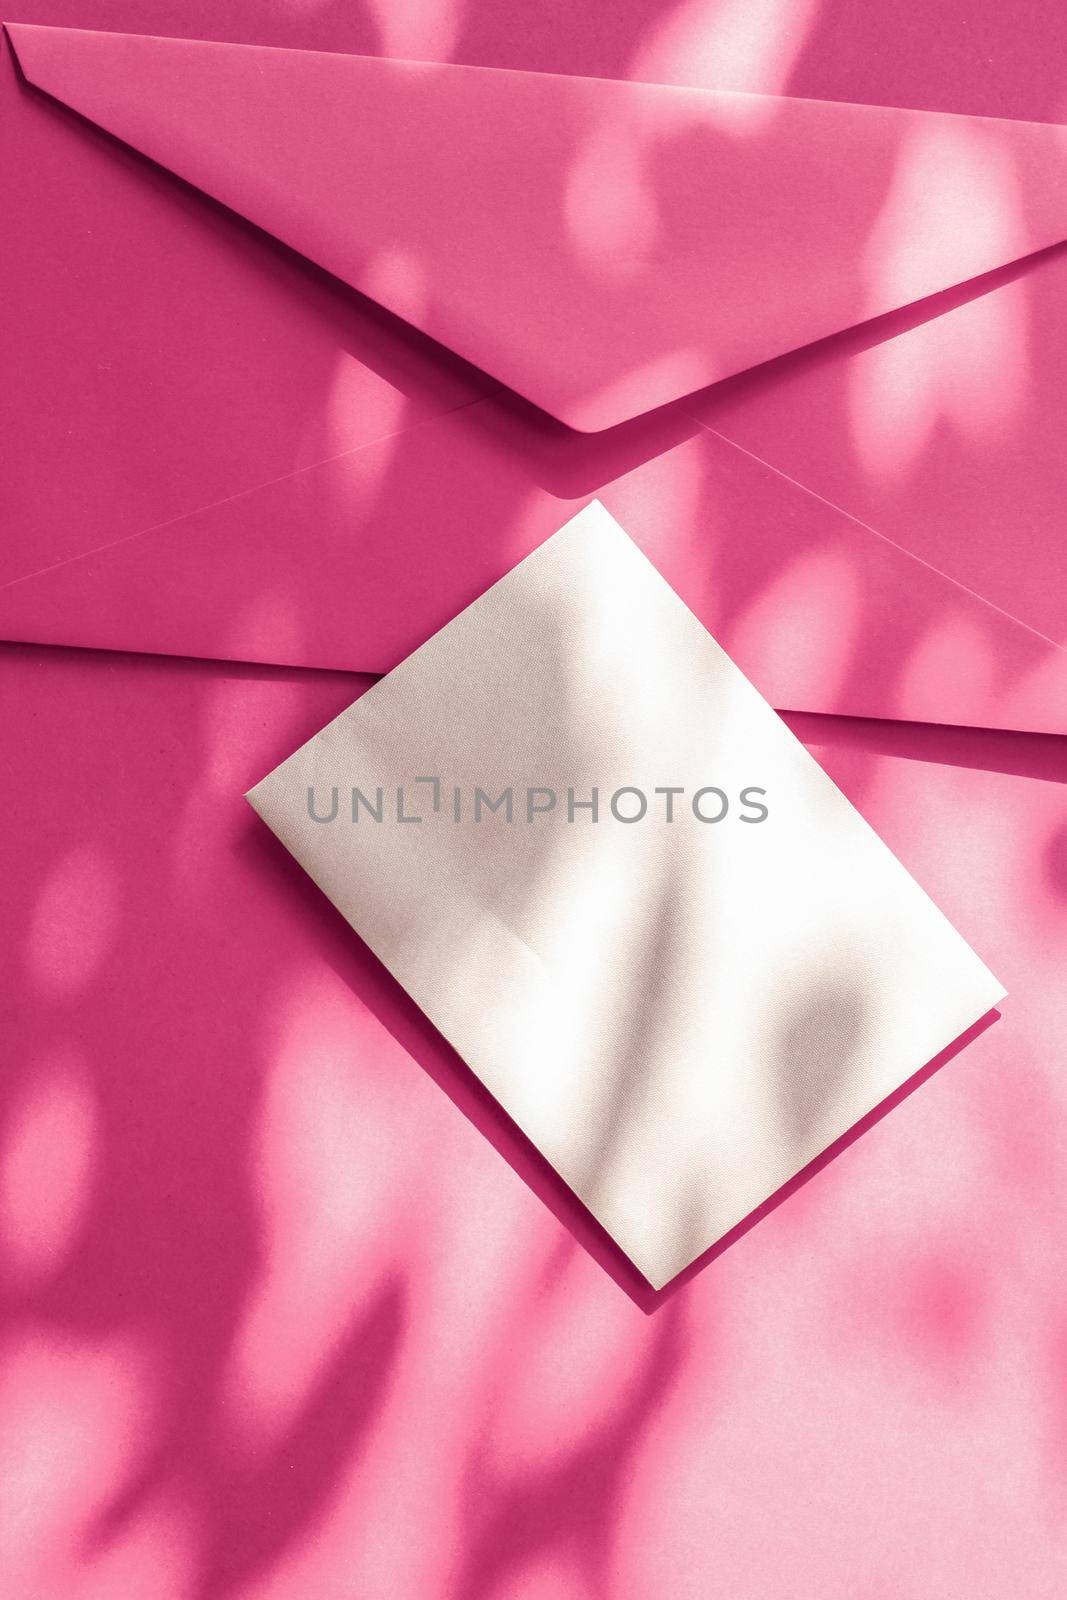 Holiday marketing, business kit and email newsletter concept - Beauty brand identity as flatlay mockup design, business card and letter for online luxury branding on pink shadow background